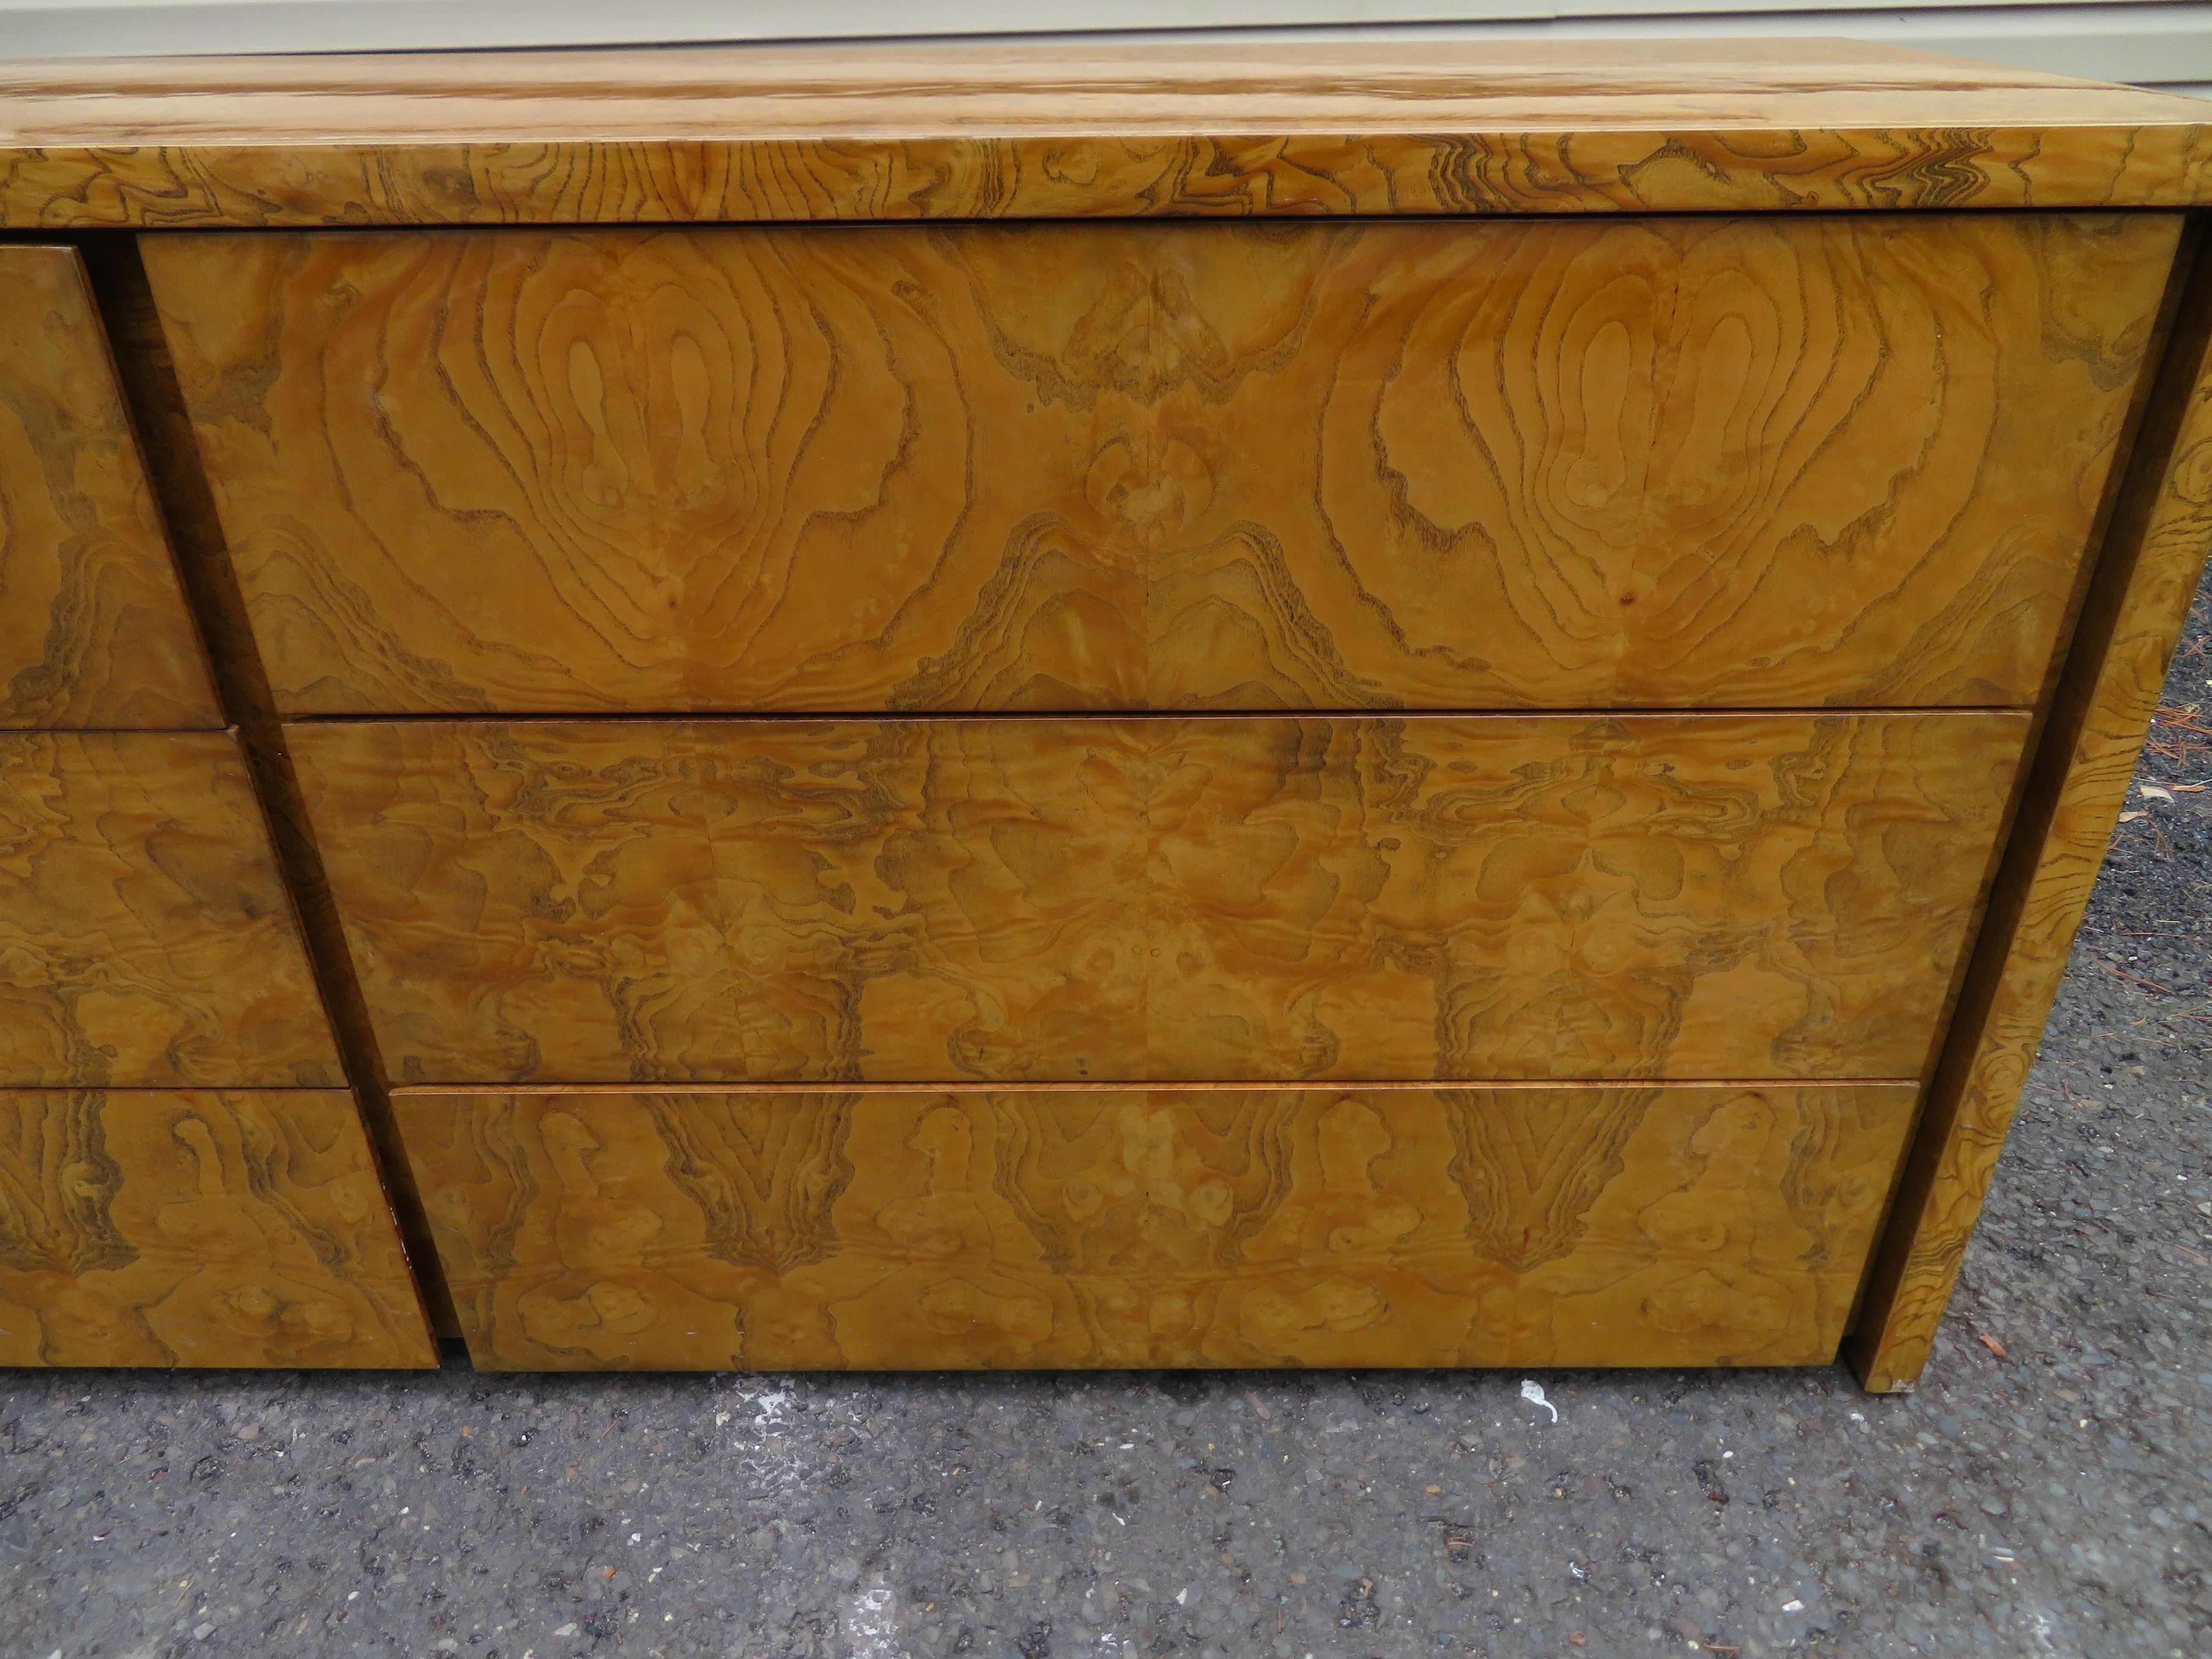 Magnificent Milo Baughman Style Burl 6 Drawer Credenza Mid-Century Modern In Good Condition For Sale In Pemberton, NJ